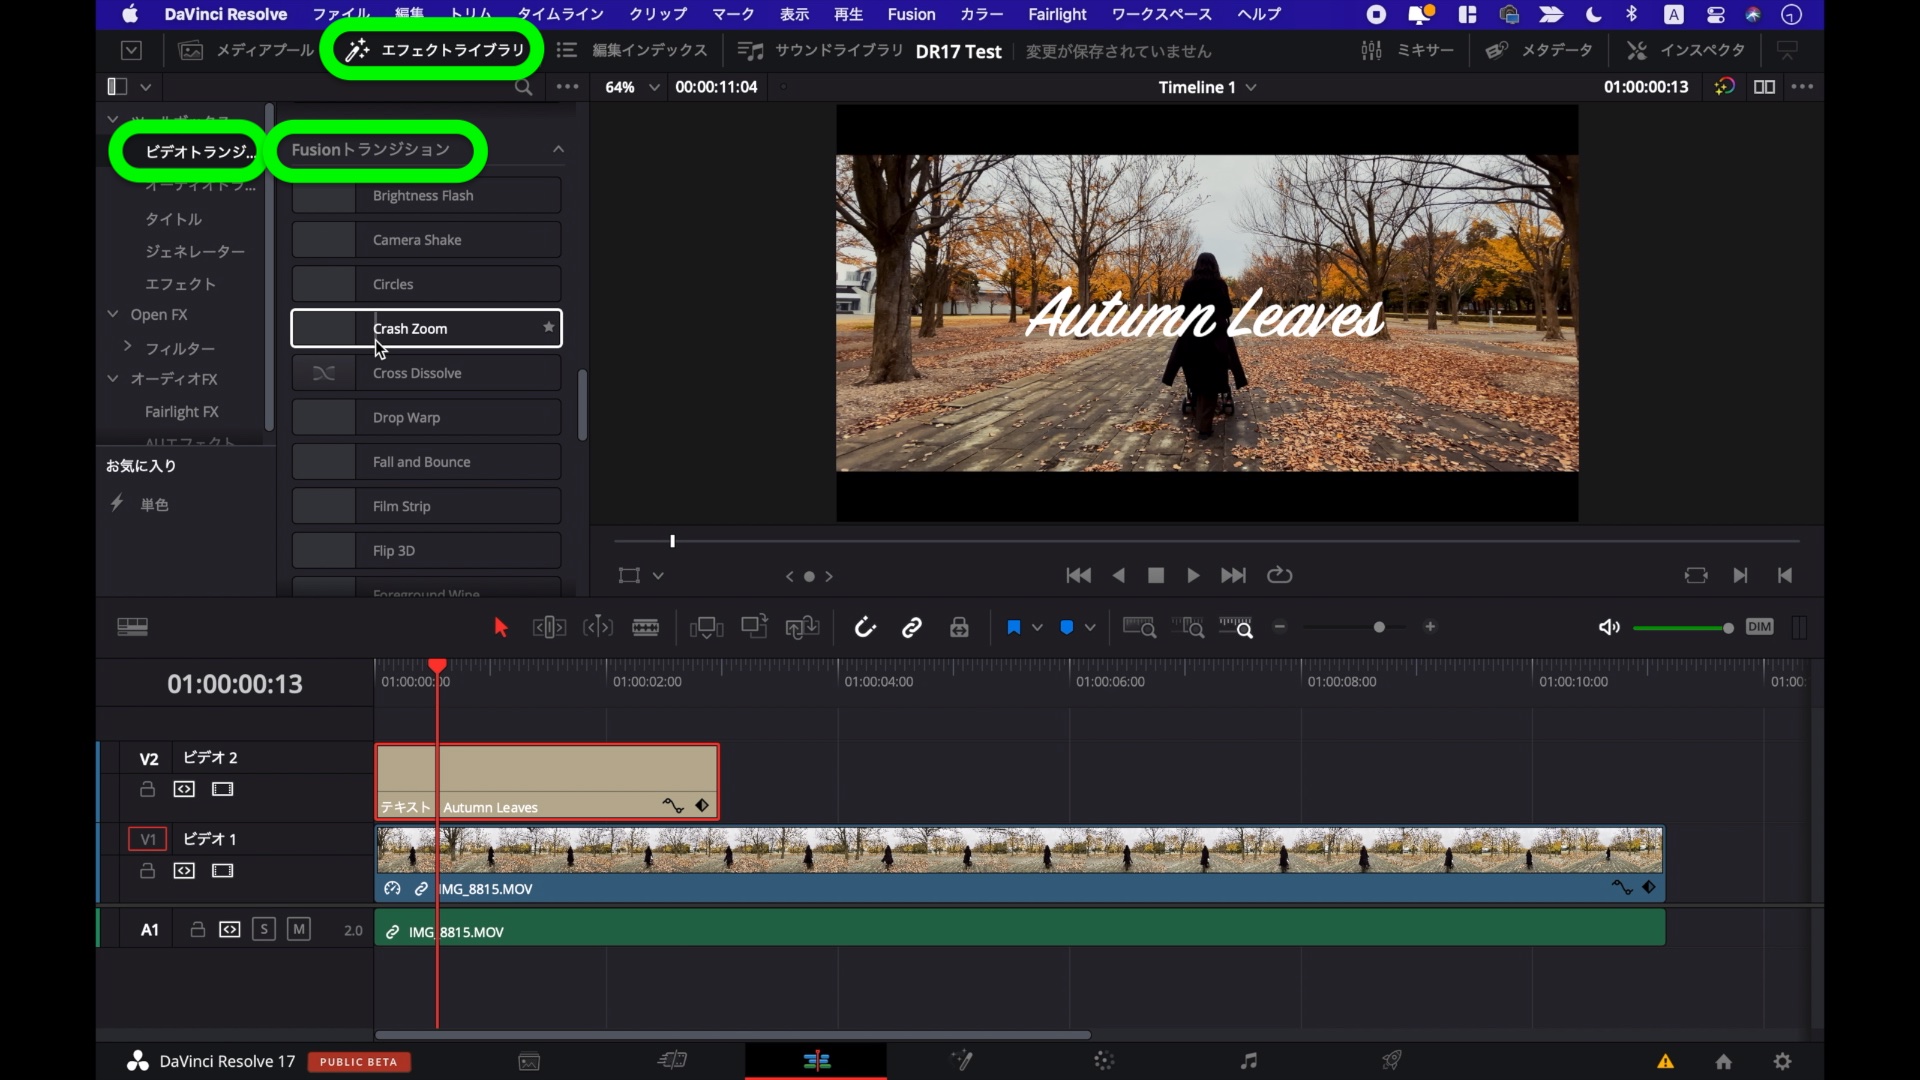 how to add text on davinci resolve 17